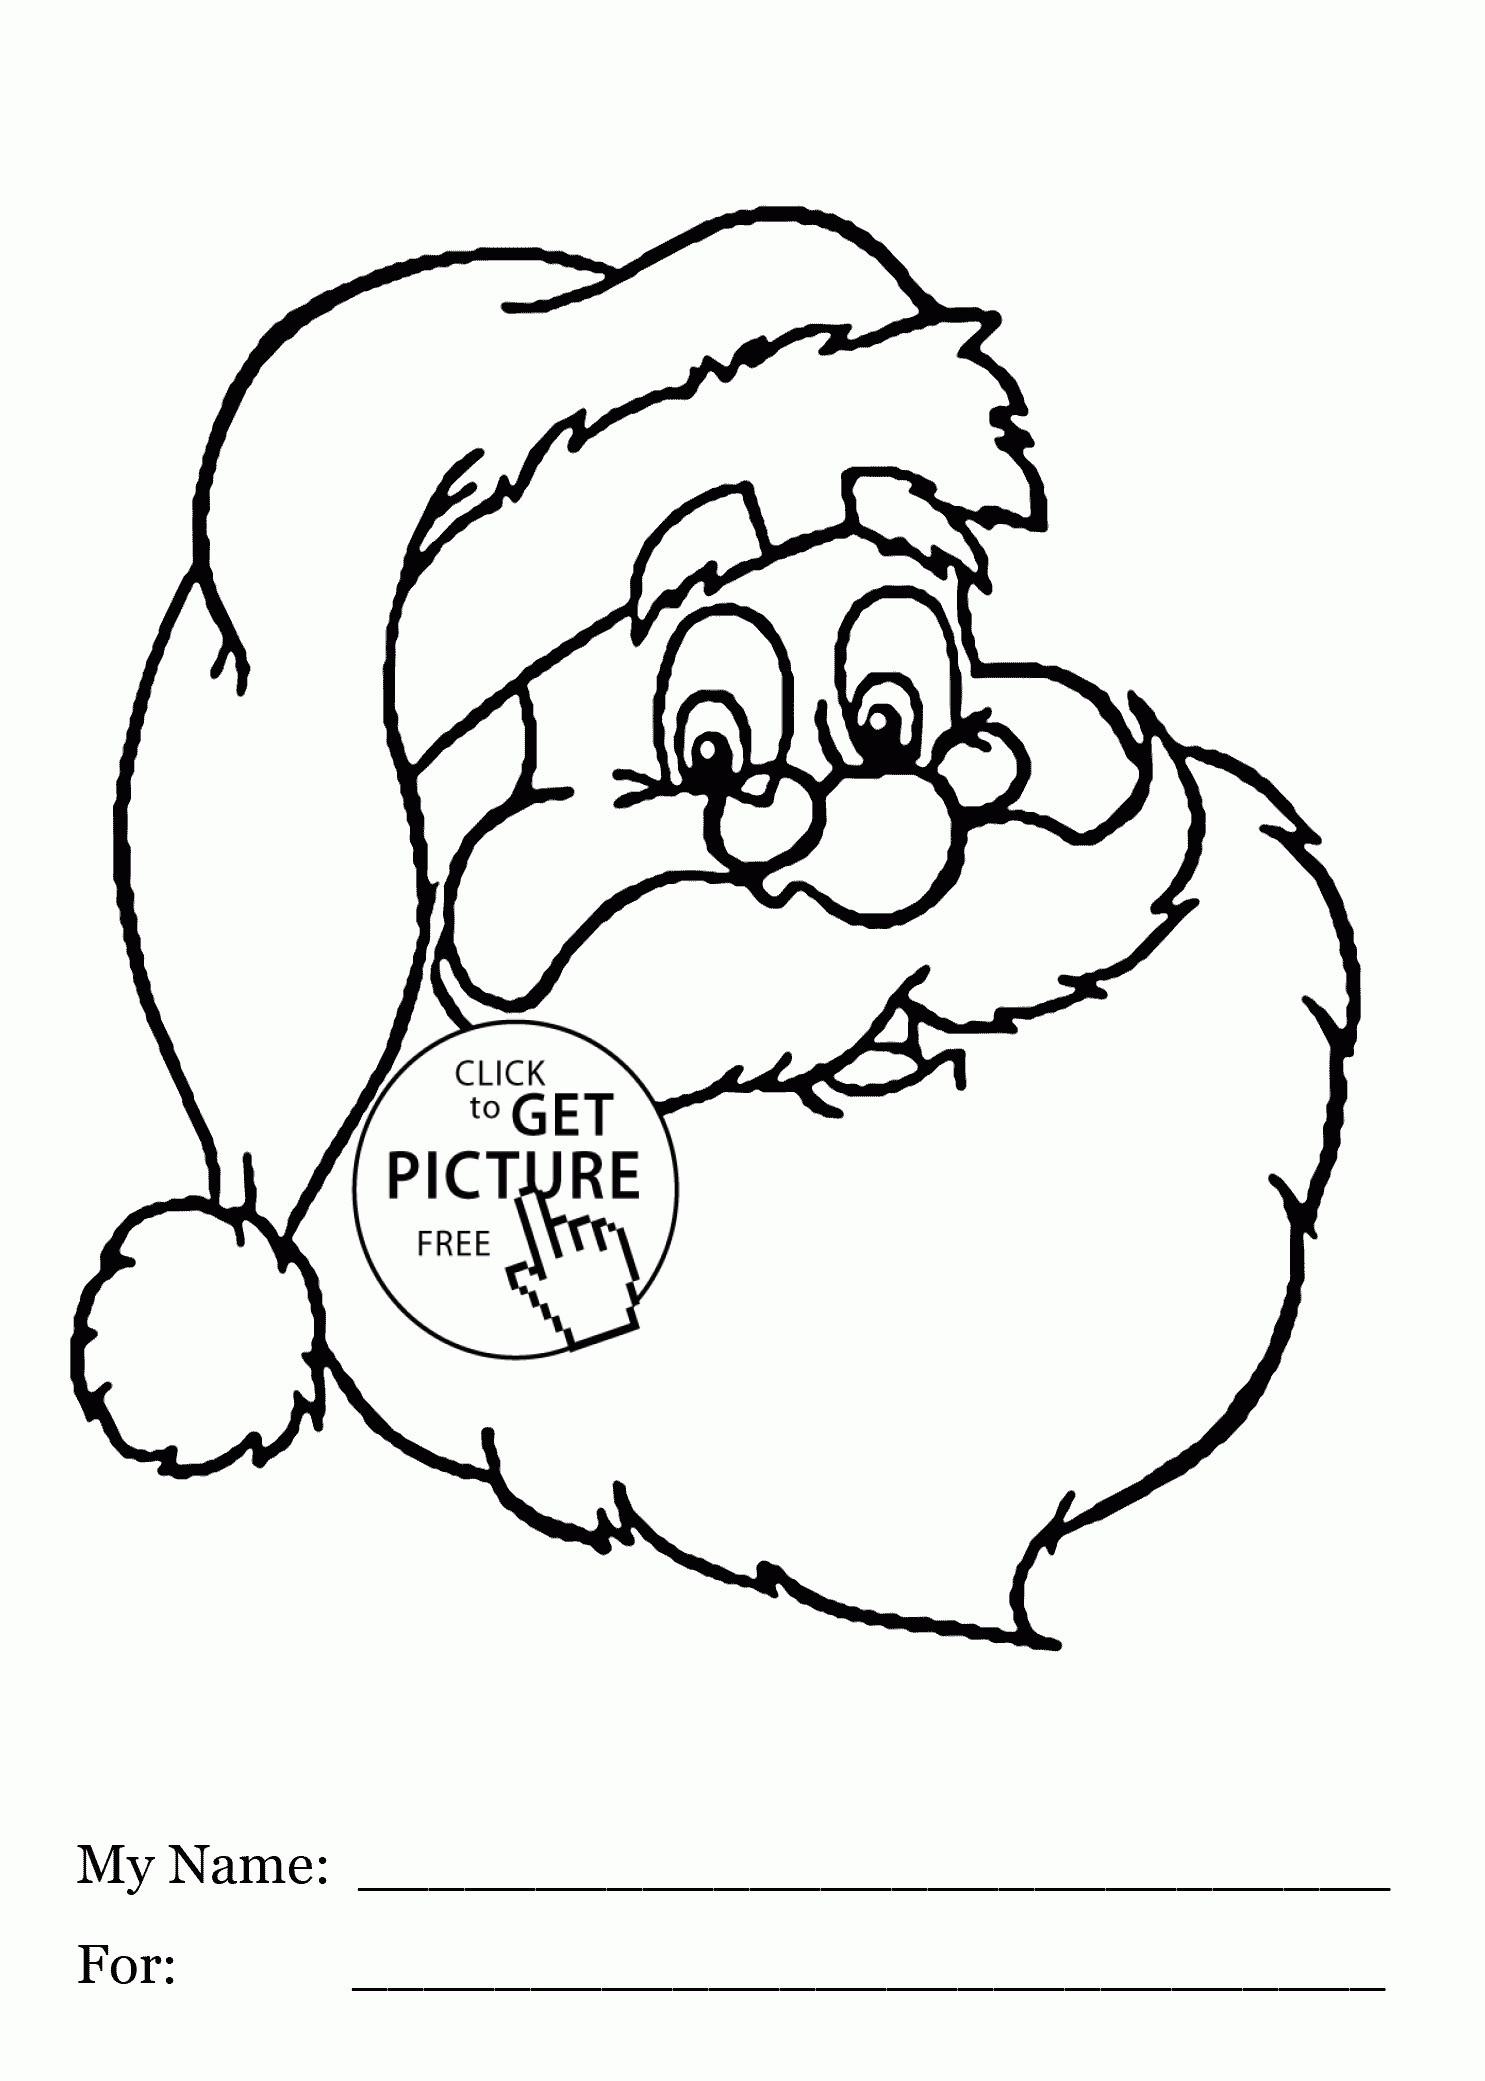 excellently claus had coloring pages for kids printable free coloring pages of santa claus 